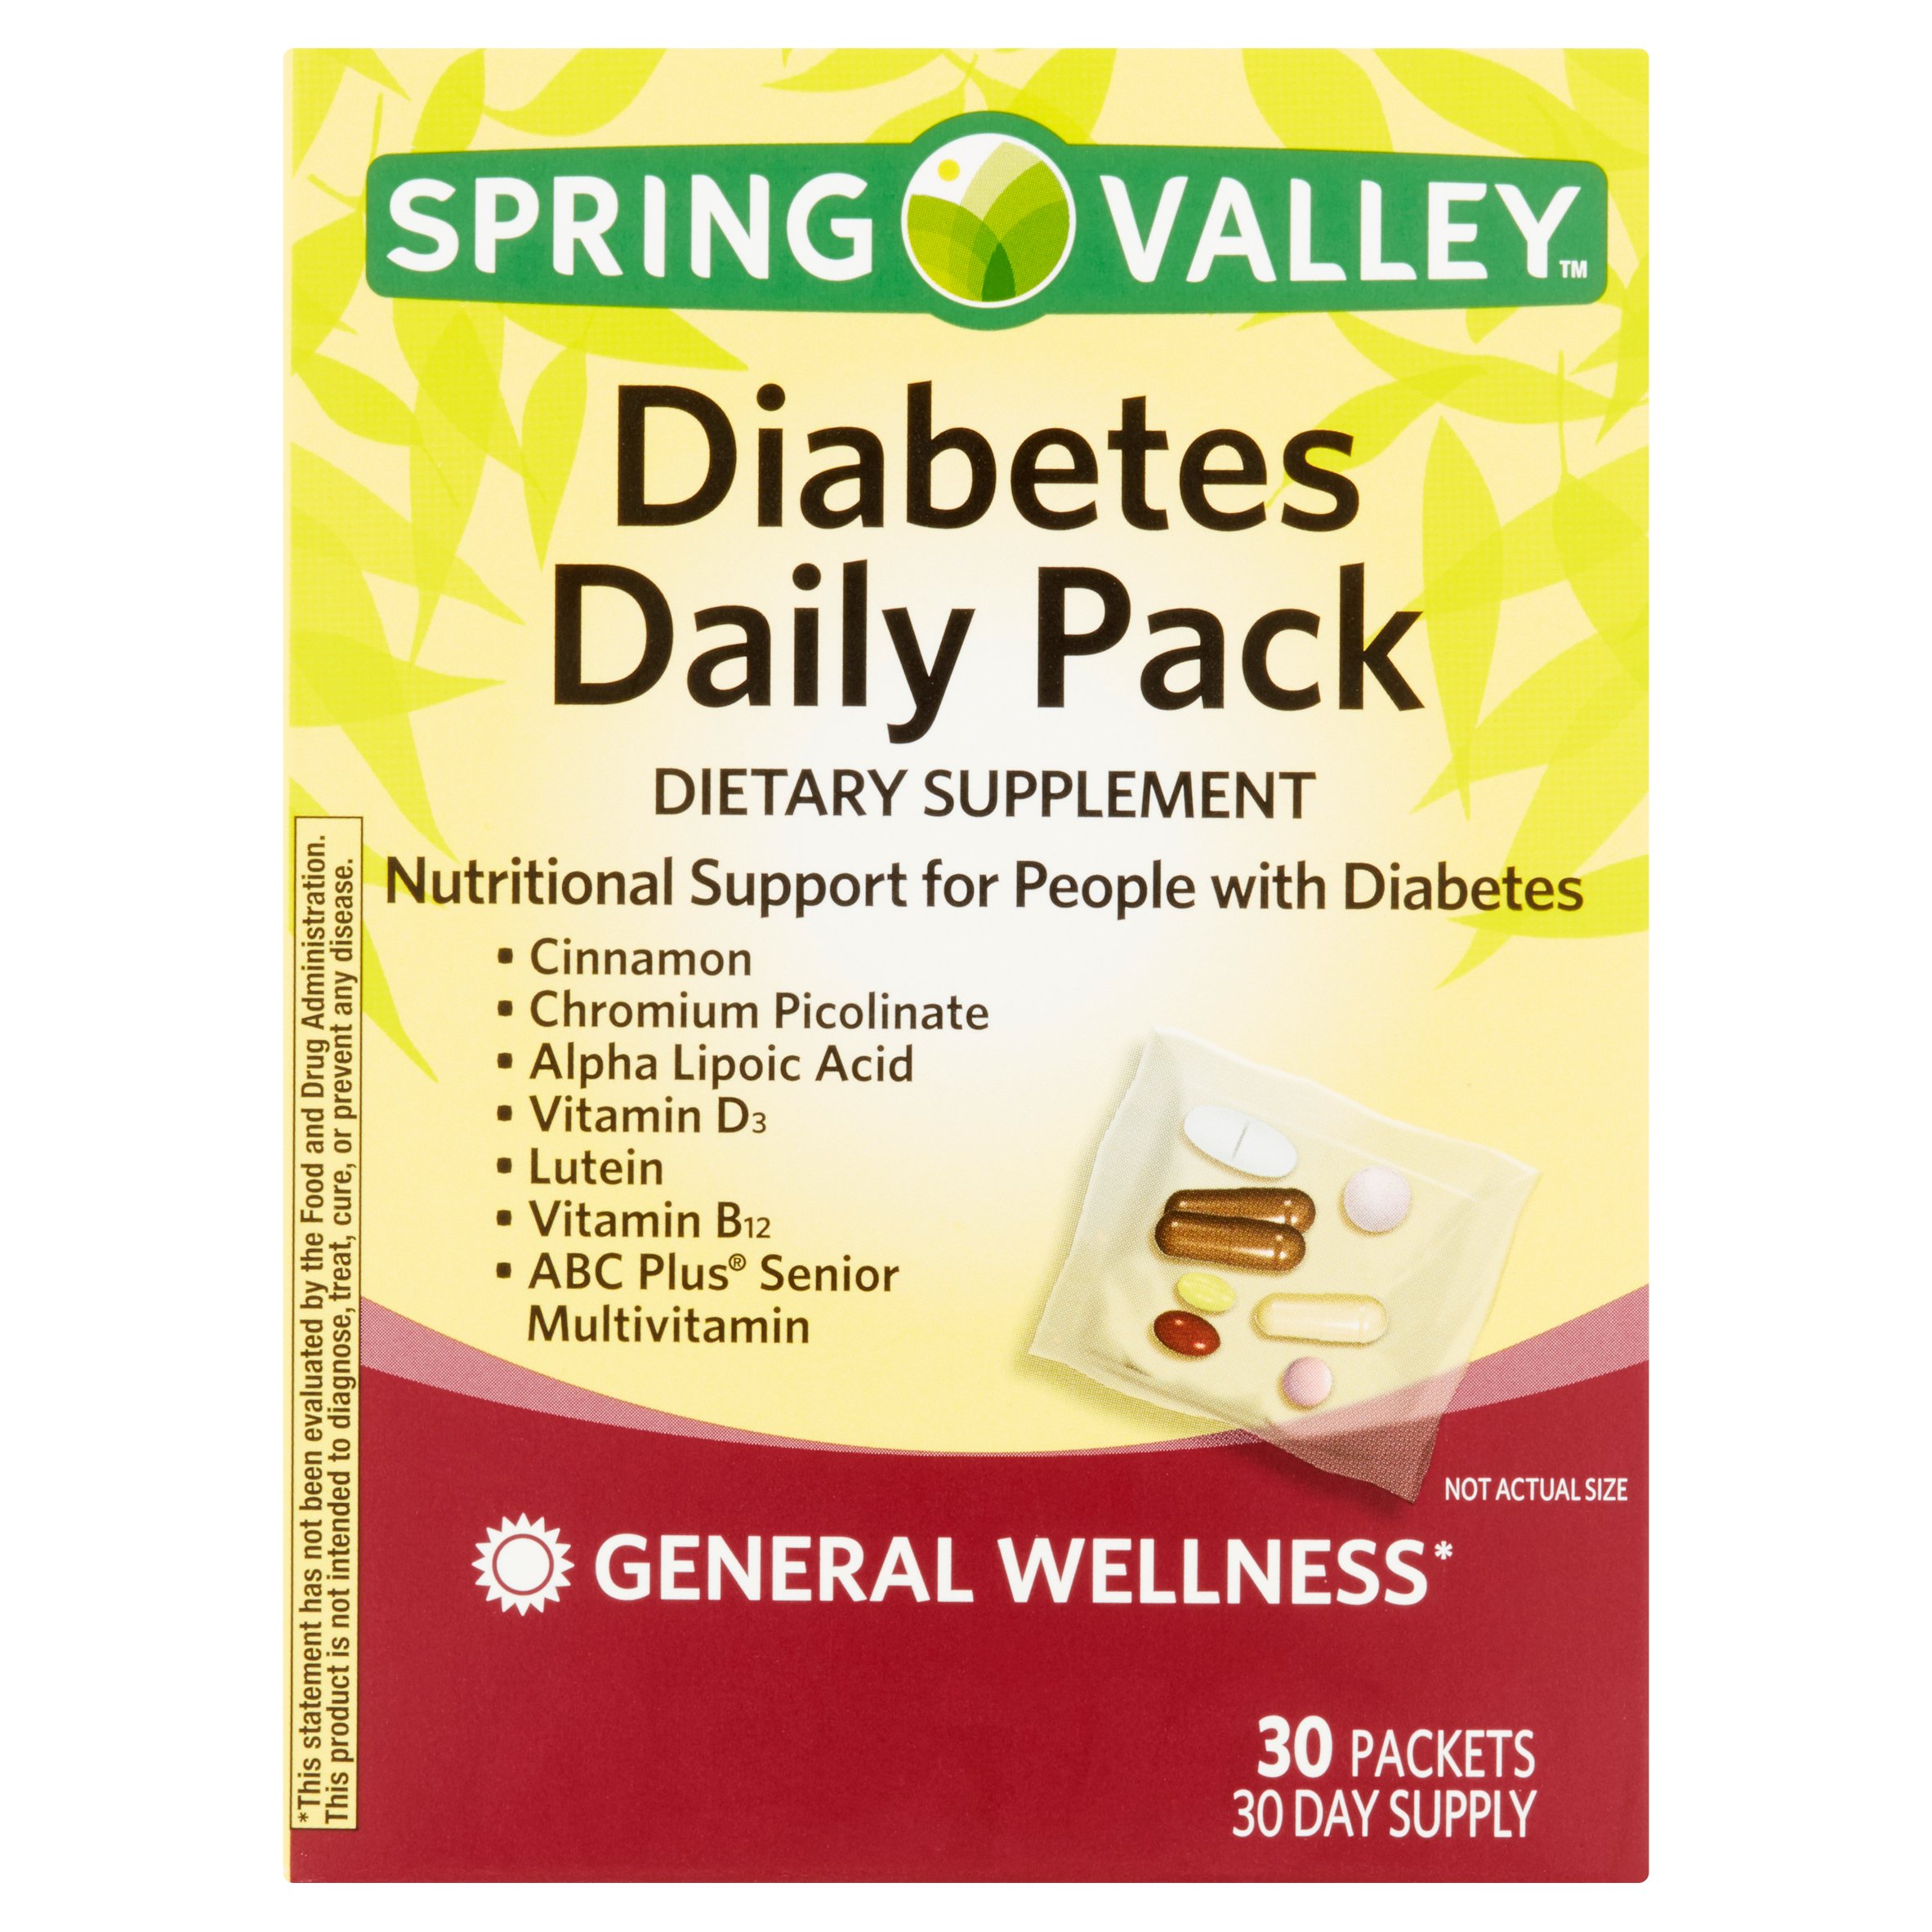 Spring Valley Diabetes Daily Pack, 30 Ct - image 1 of 5